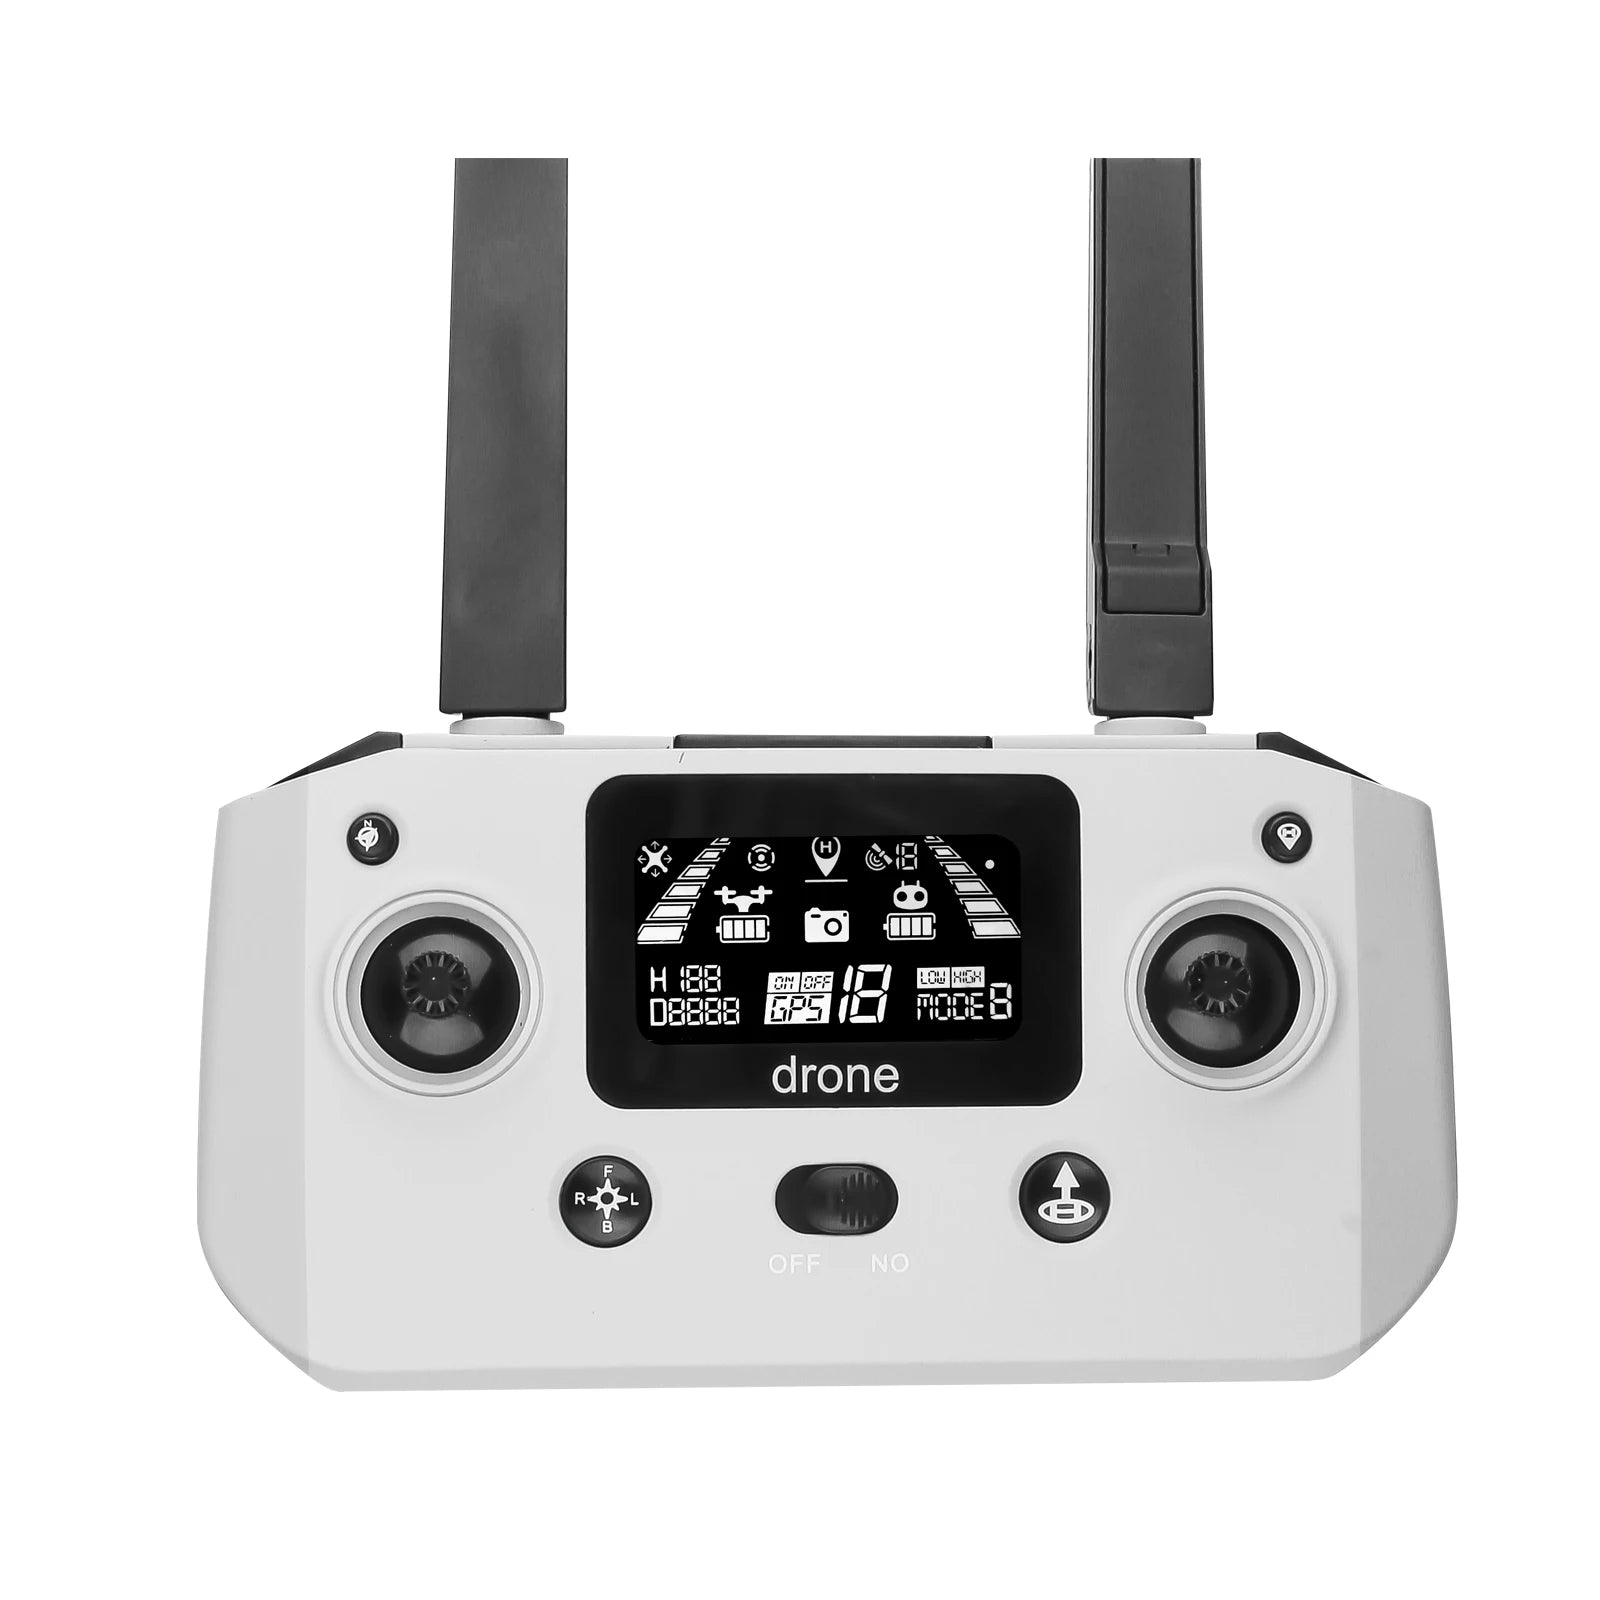 S188 Drone, ZUIMI Aircraf is a two-axis EIS electronic anti-shake